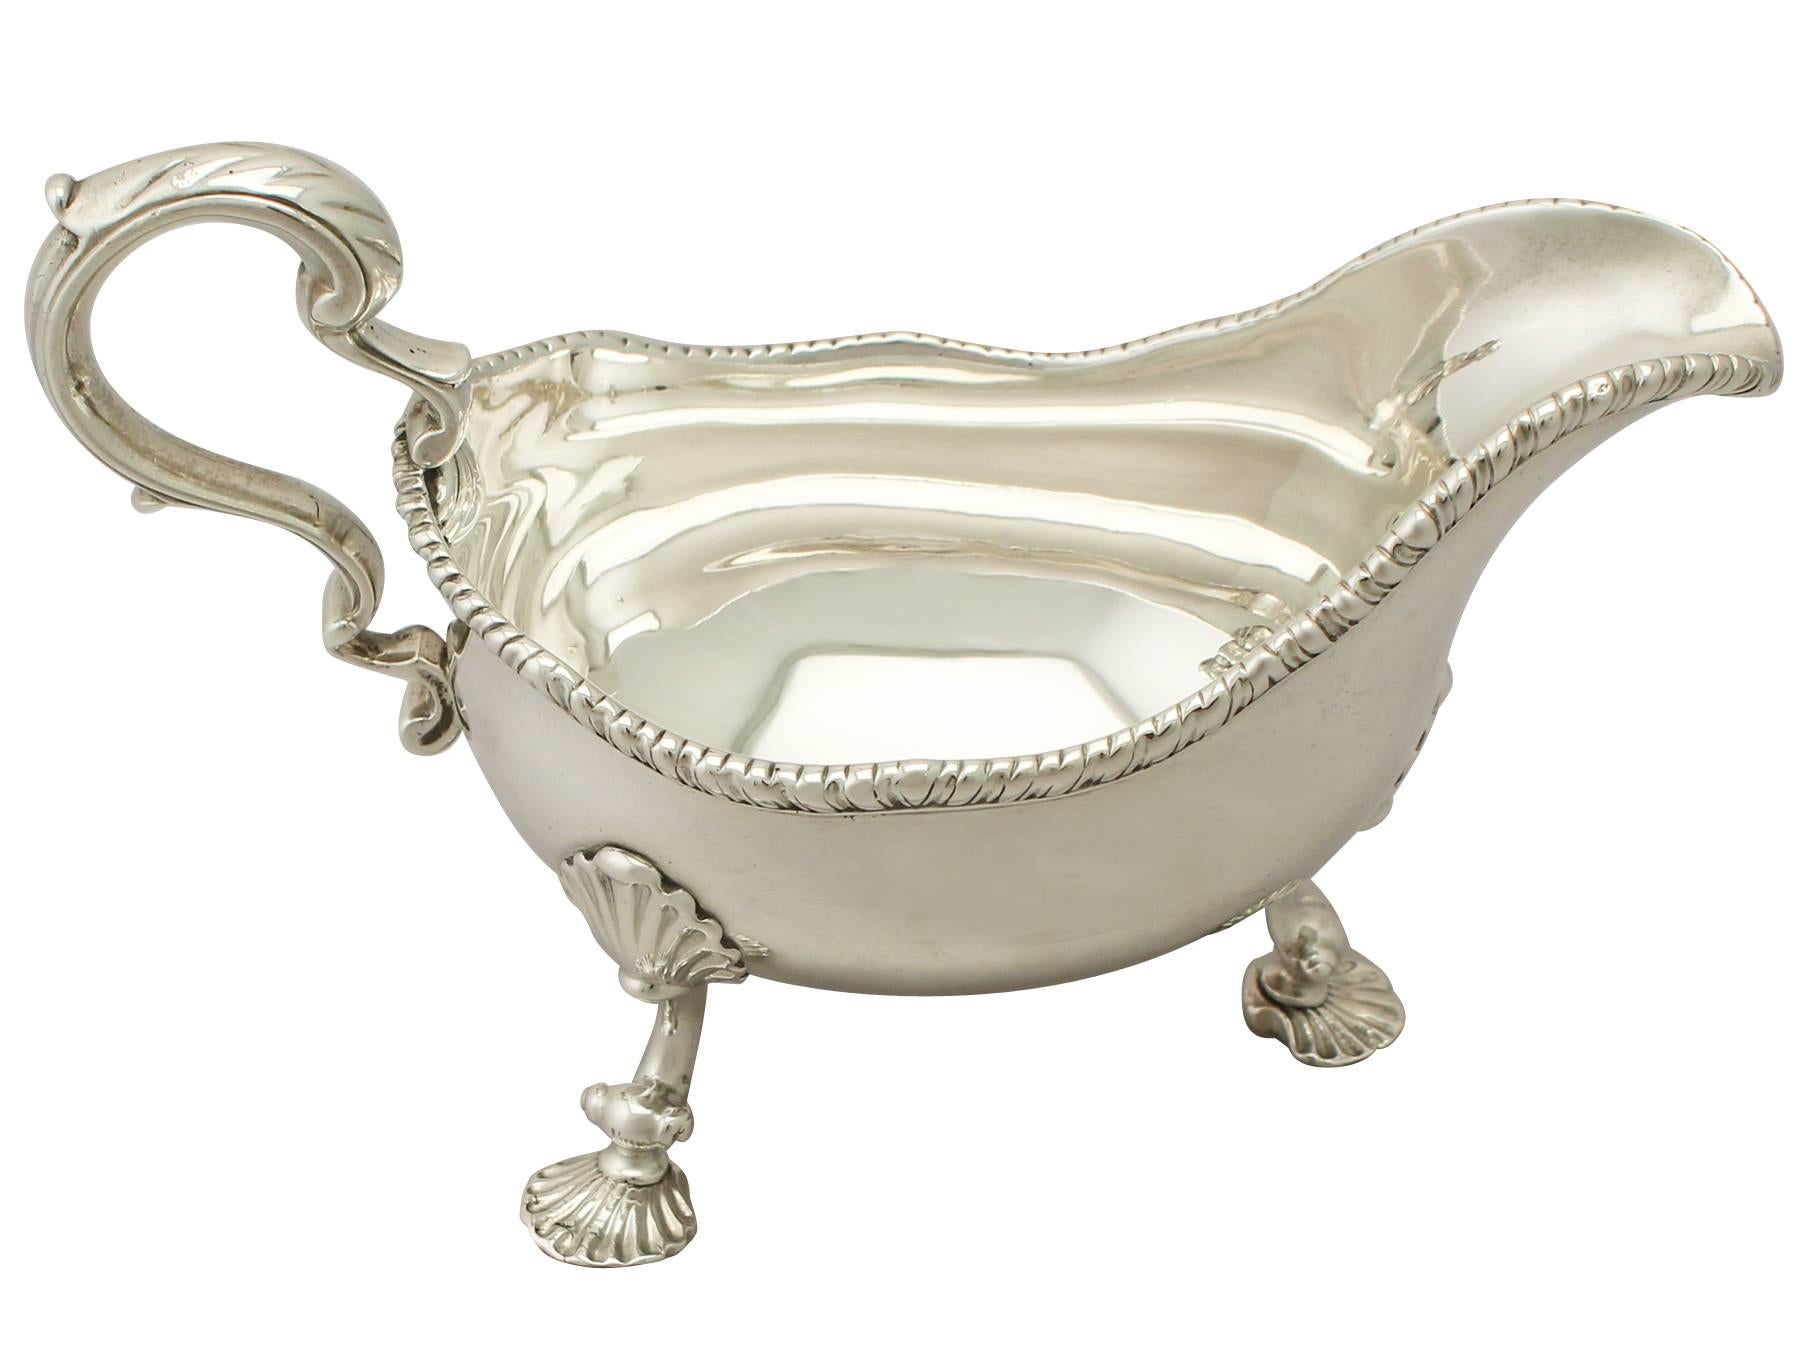 An exceptional, fine and impressive antique Georgian English sterling silver sauceboat/gravy biat; an addition to our silver dining collection.

This exceptional antique George III sterling silver sauce boat/gravy boat has a plain oval rounded